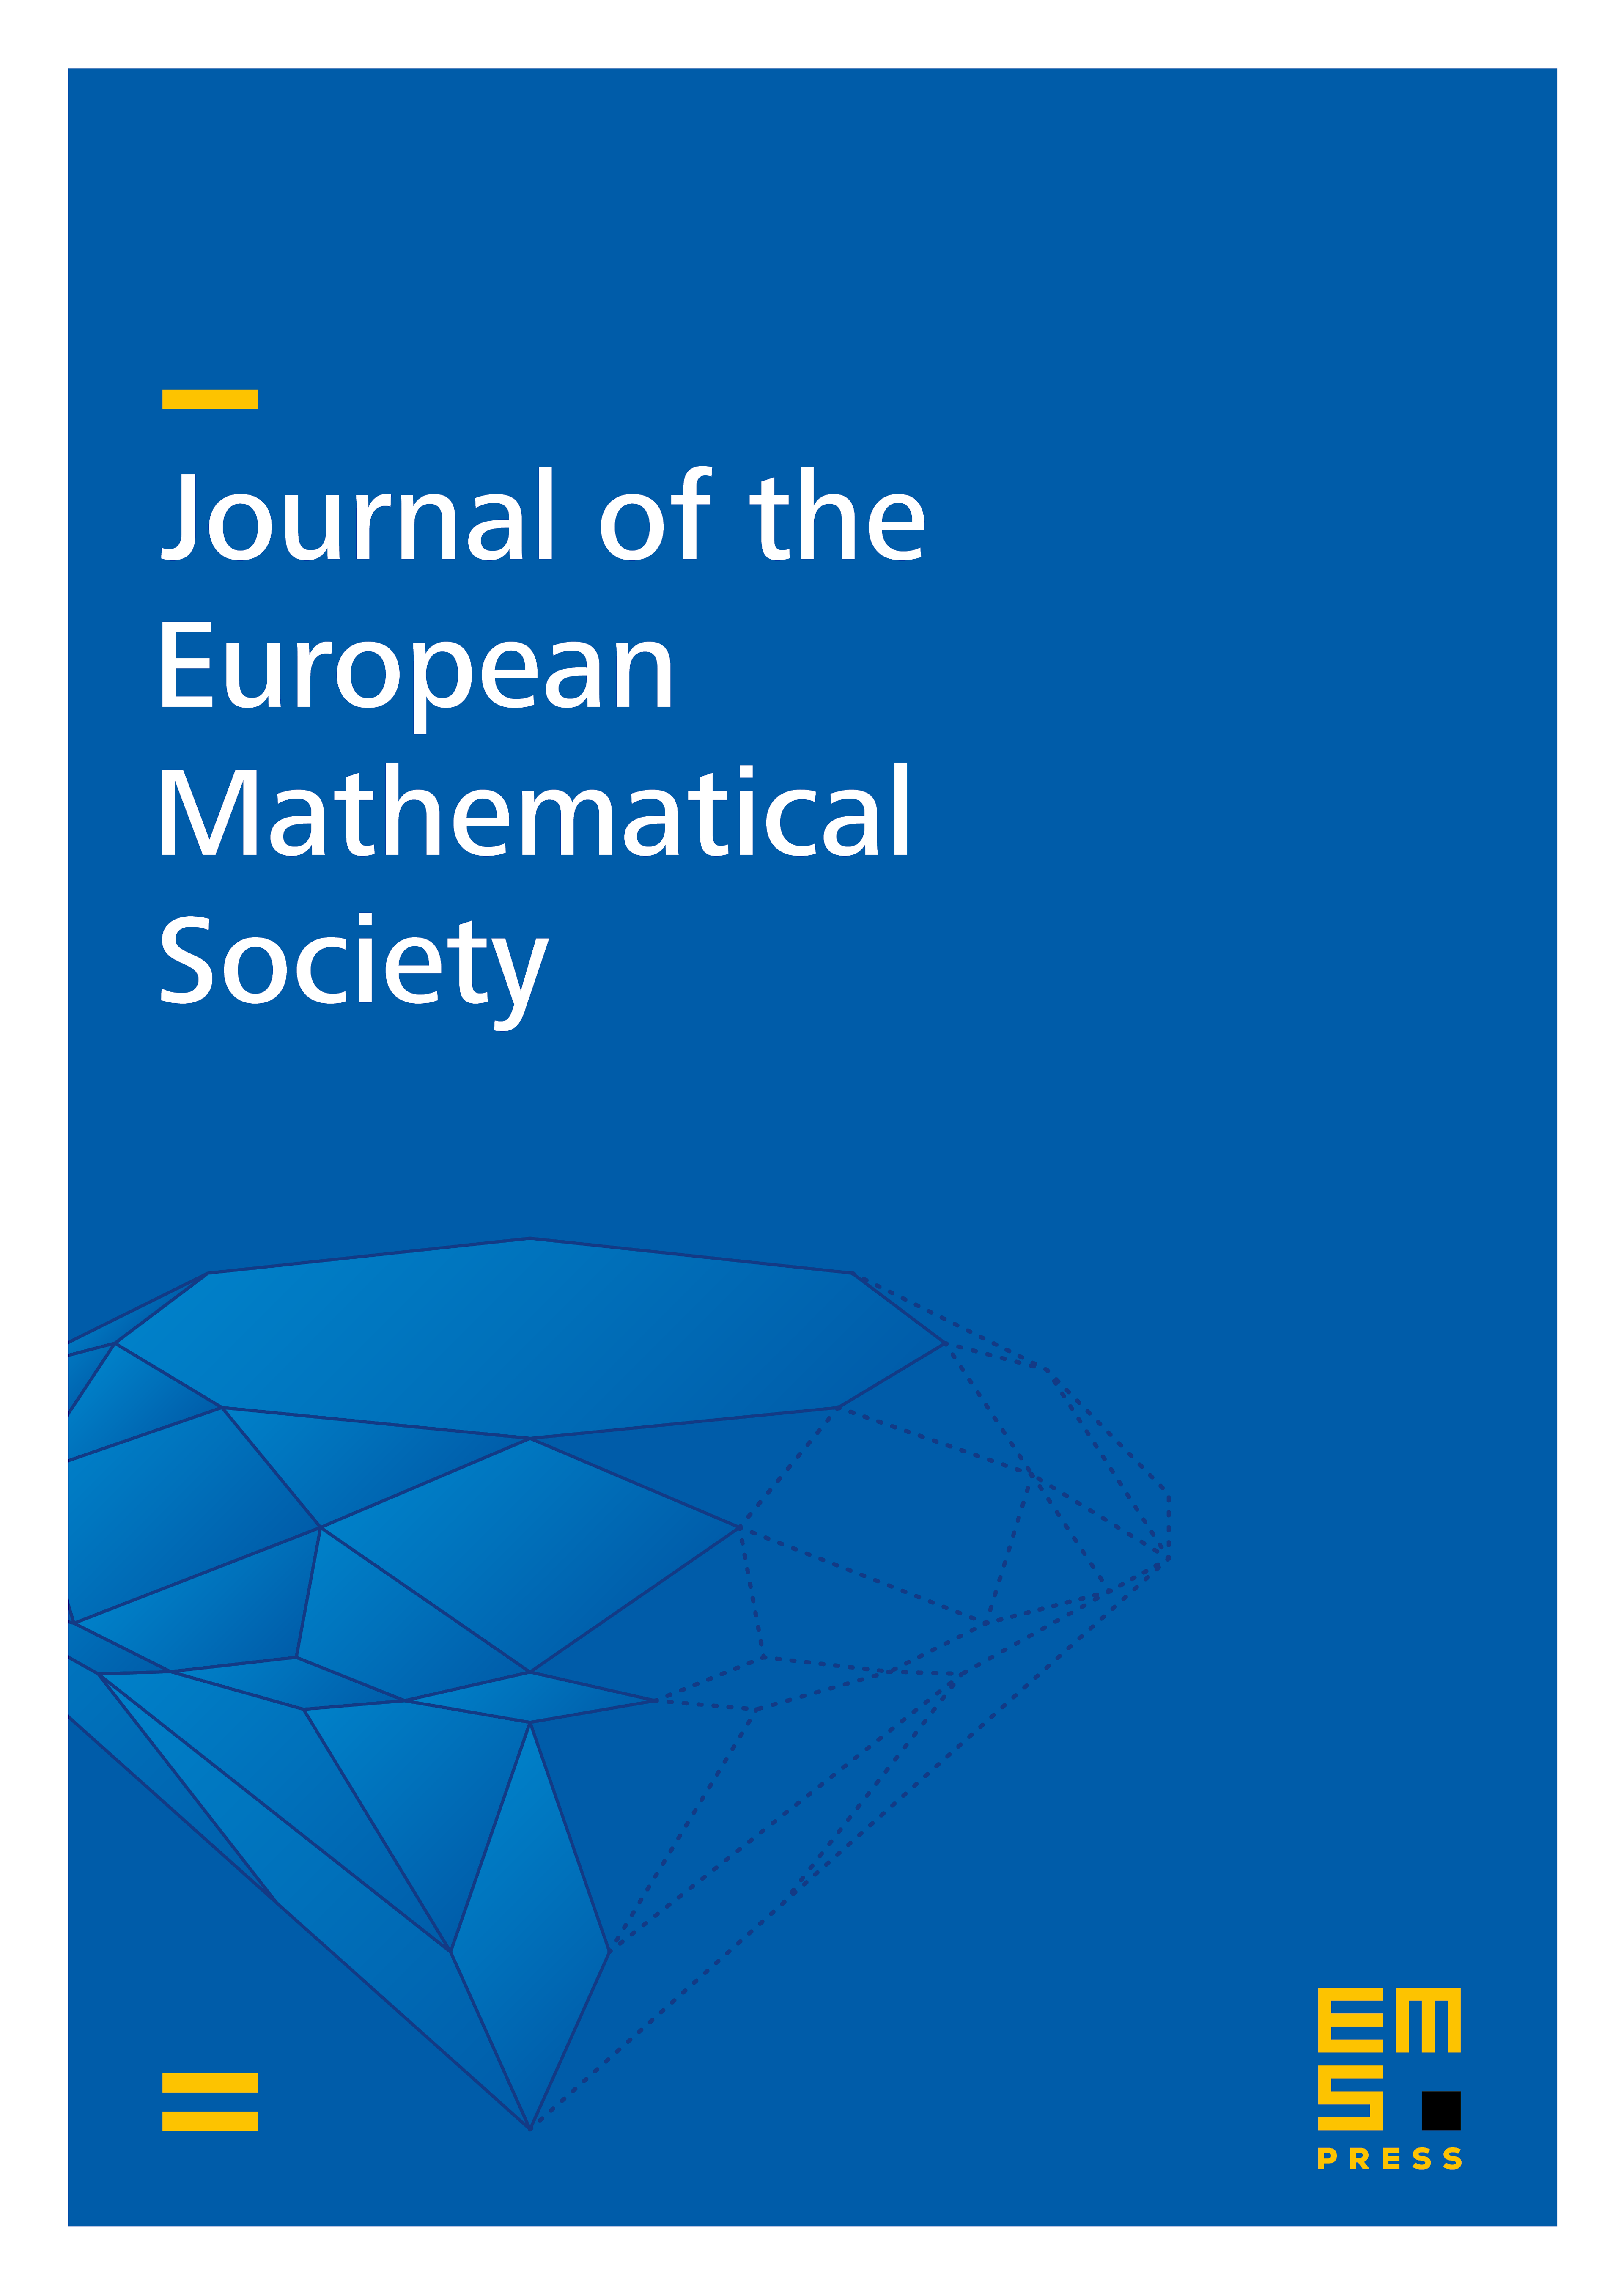 A proof of the Multijoints Conjecture and Carbery's generalization cover